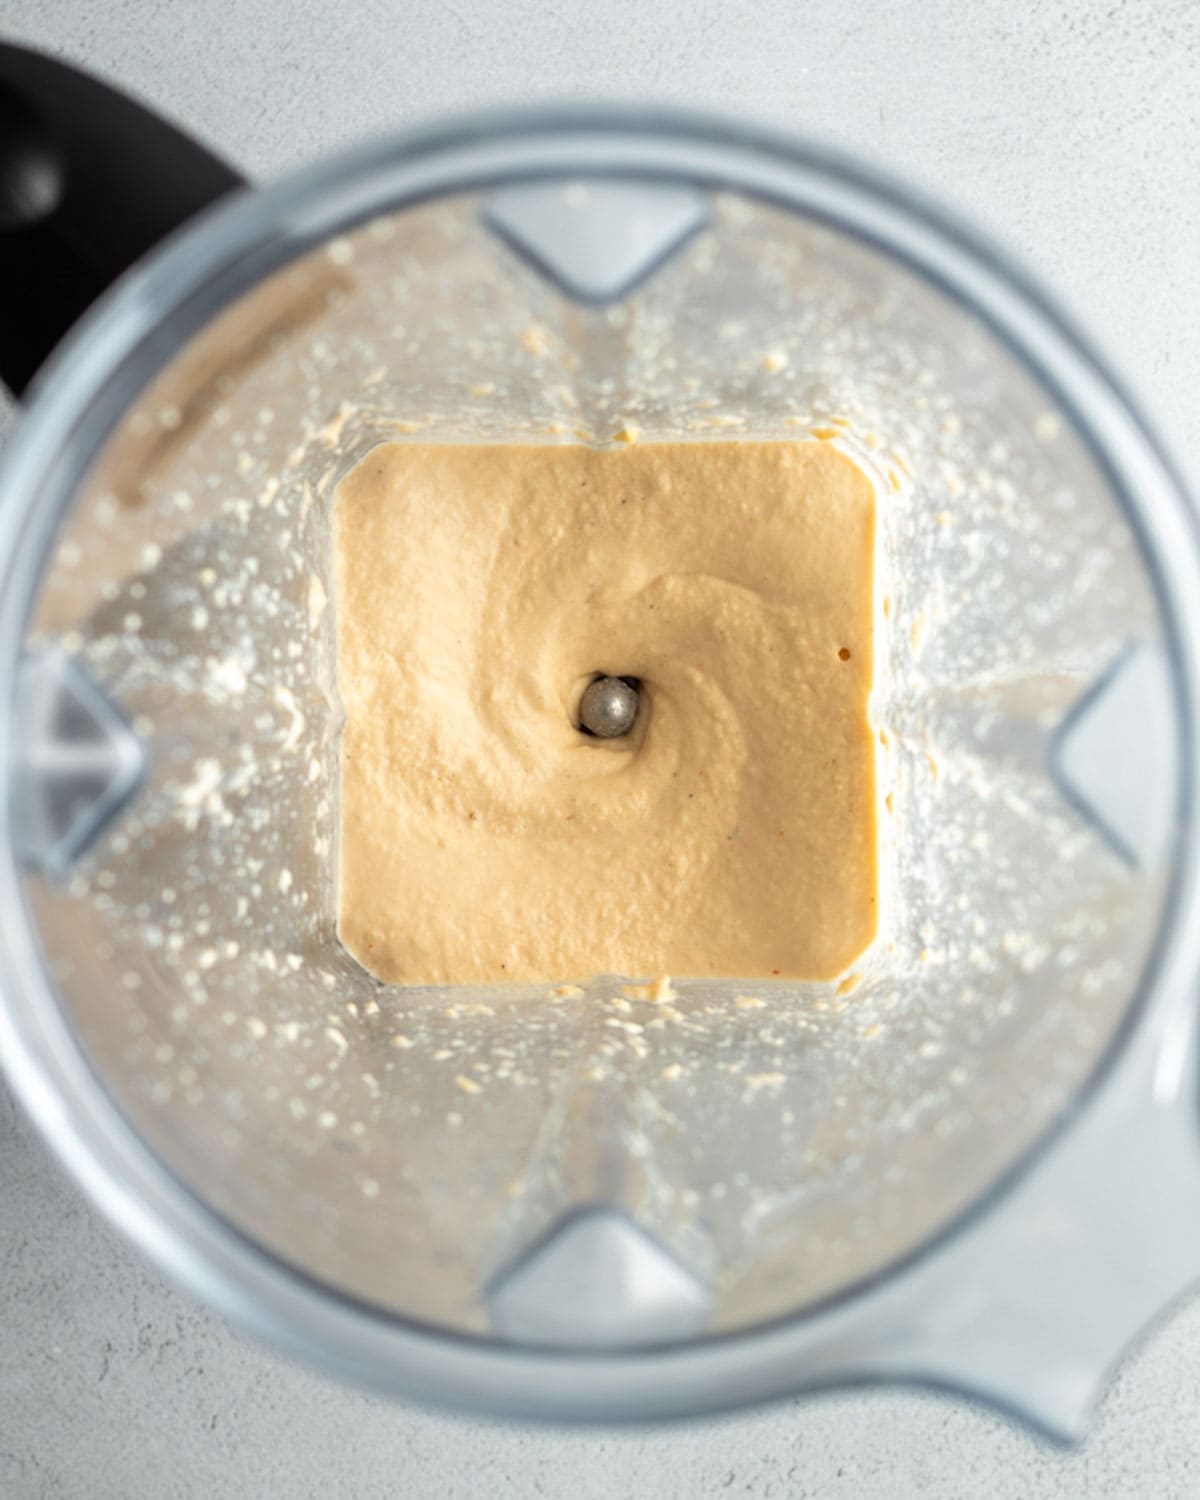 Looking inside a blender at the cashew cheese mixture.